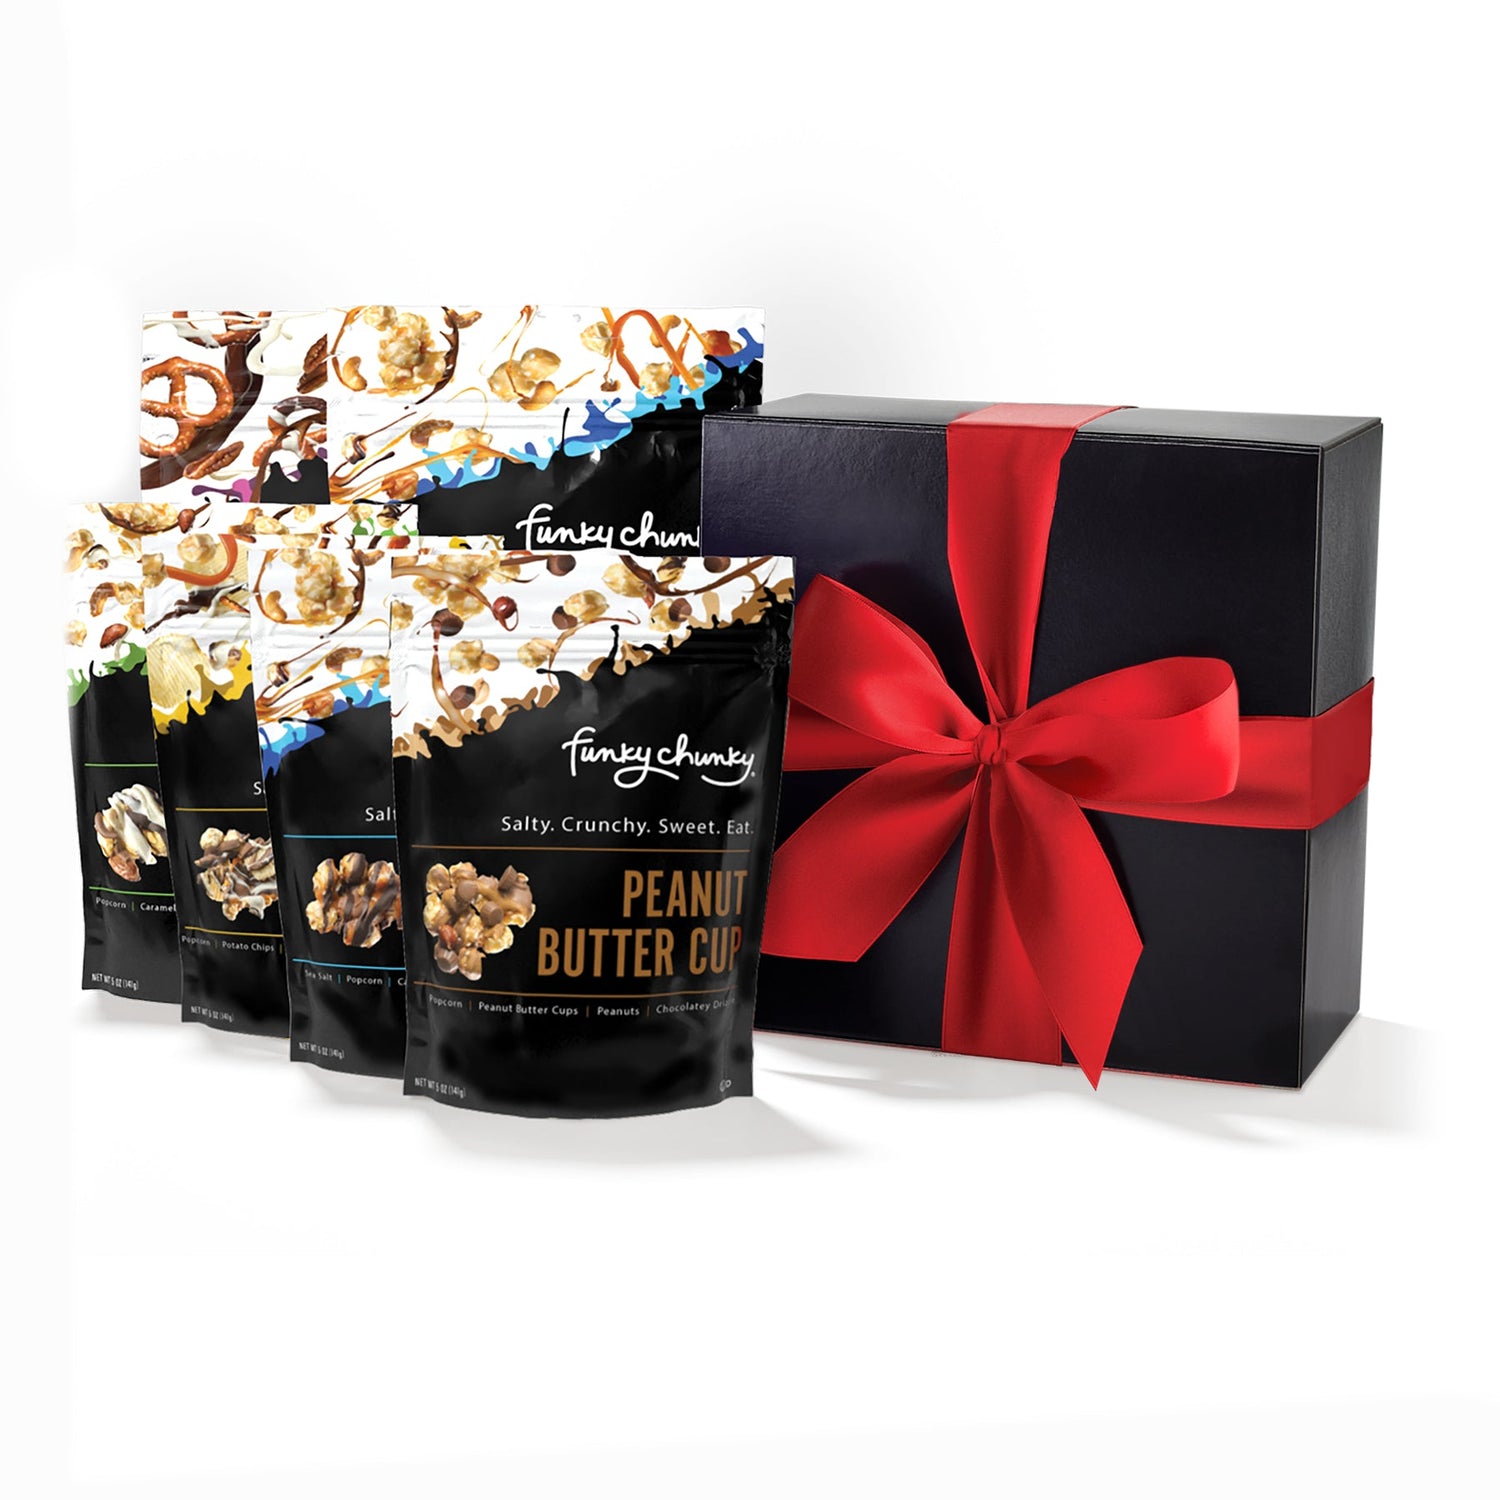 Funky Box-Our Funky Box contains 2 large bags of Chocolate Pretzel and Sea Salt Caramel, as well as 4 smaller bags of Peanut Butter Cup, Nutty Choco Pop, Sea Salt Caramel Popcorn and Chip Zel Pop. Contains two 5 oz bags and four 2 oz bags (18 oz).-Funky Chunky